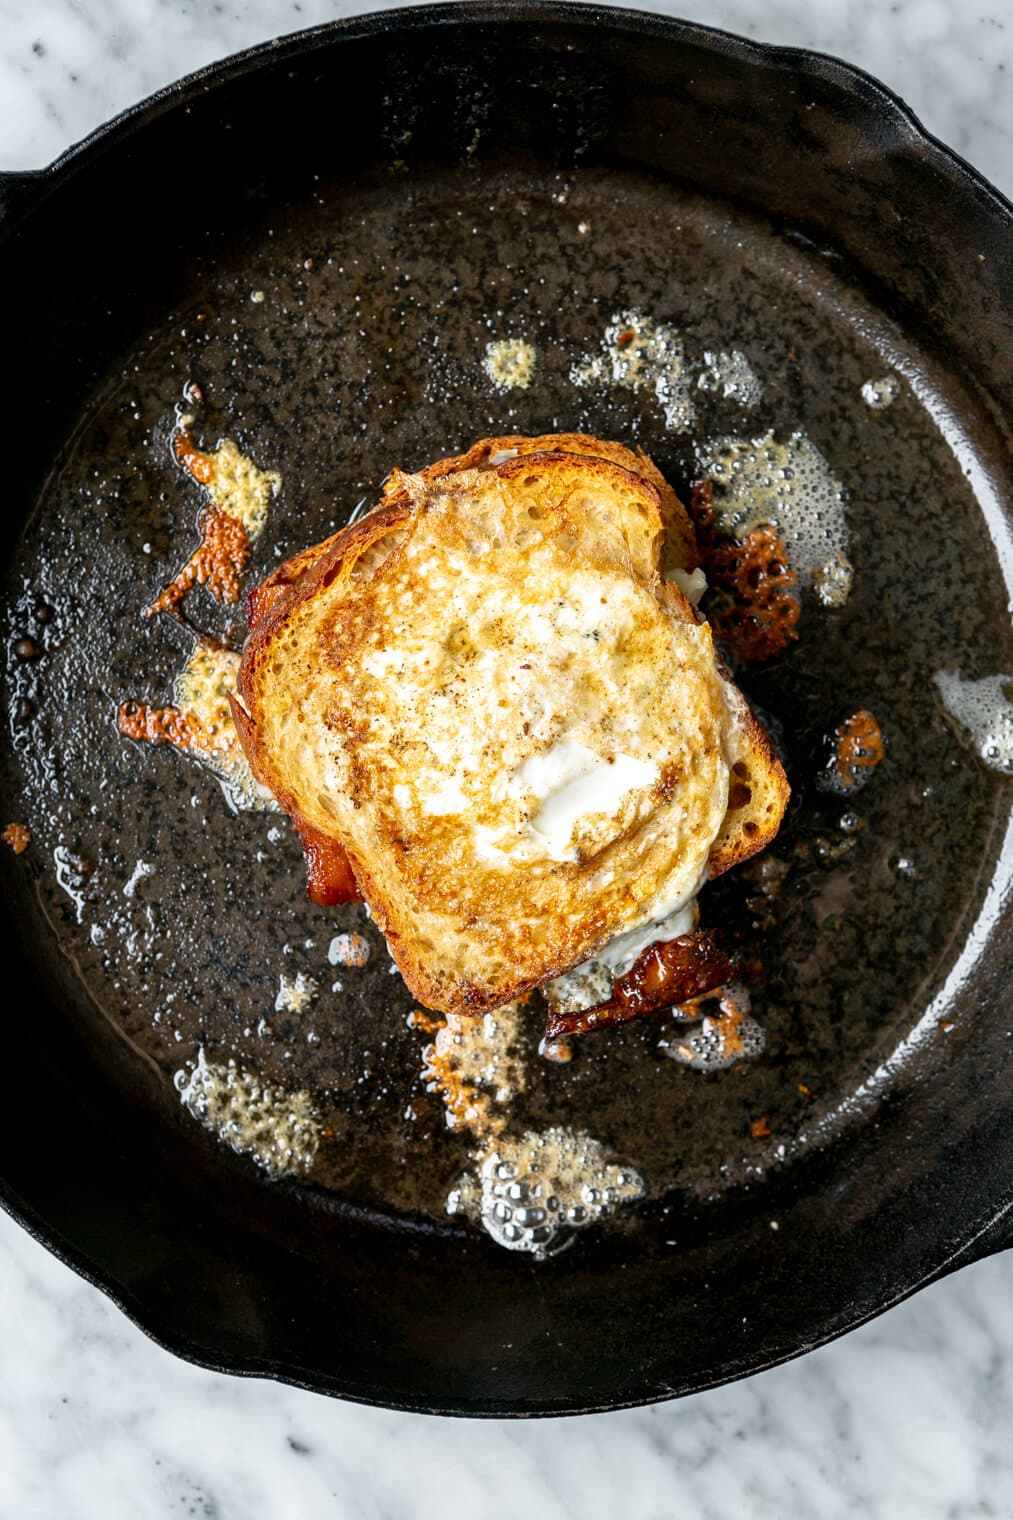 Slice of bread with egg cooked in the middle in a cast iron pan.